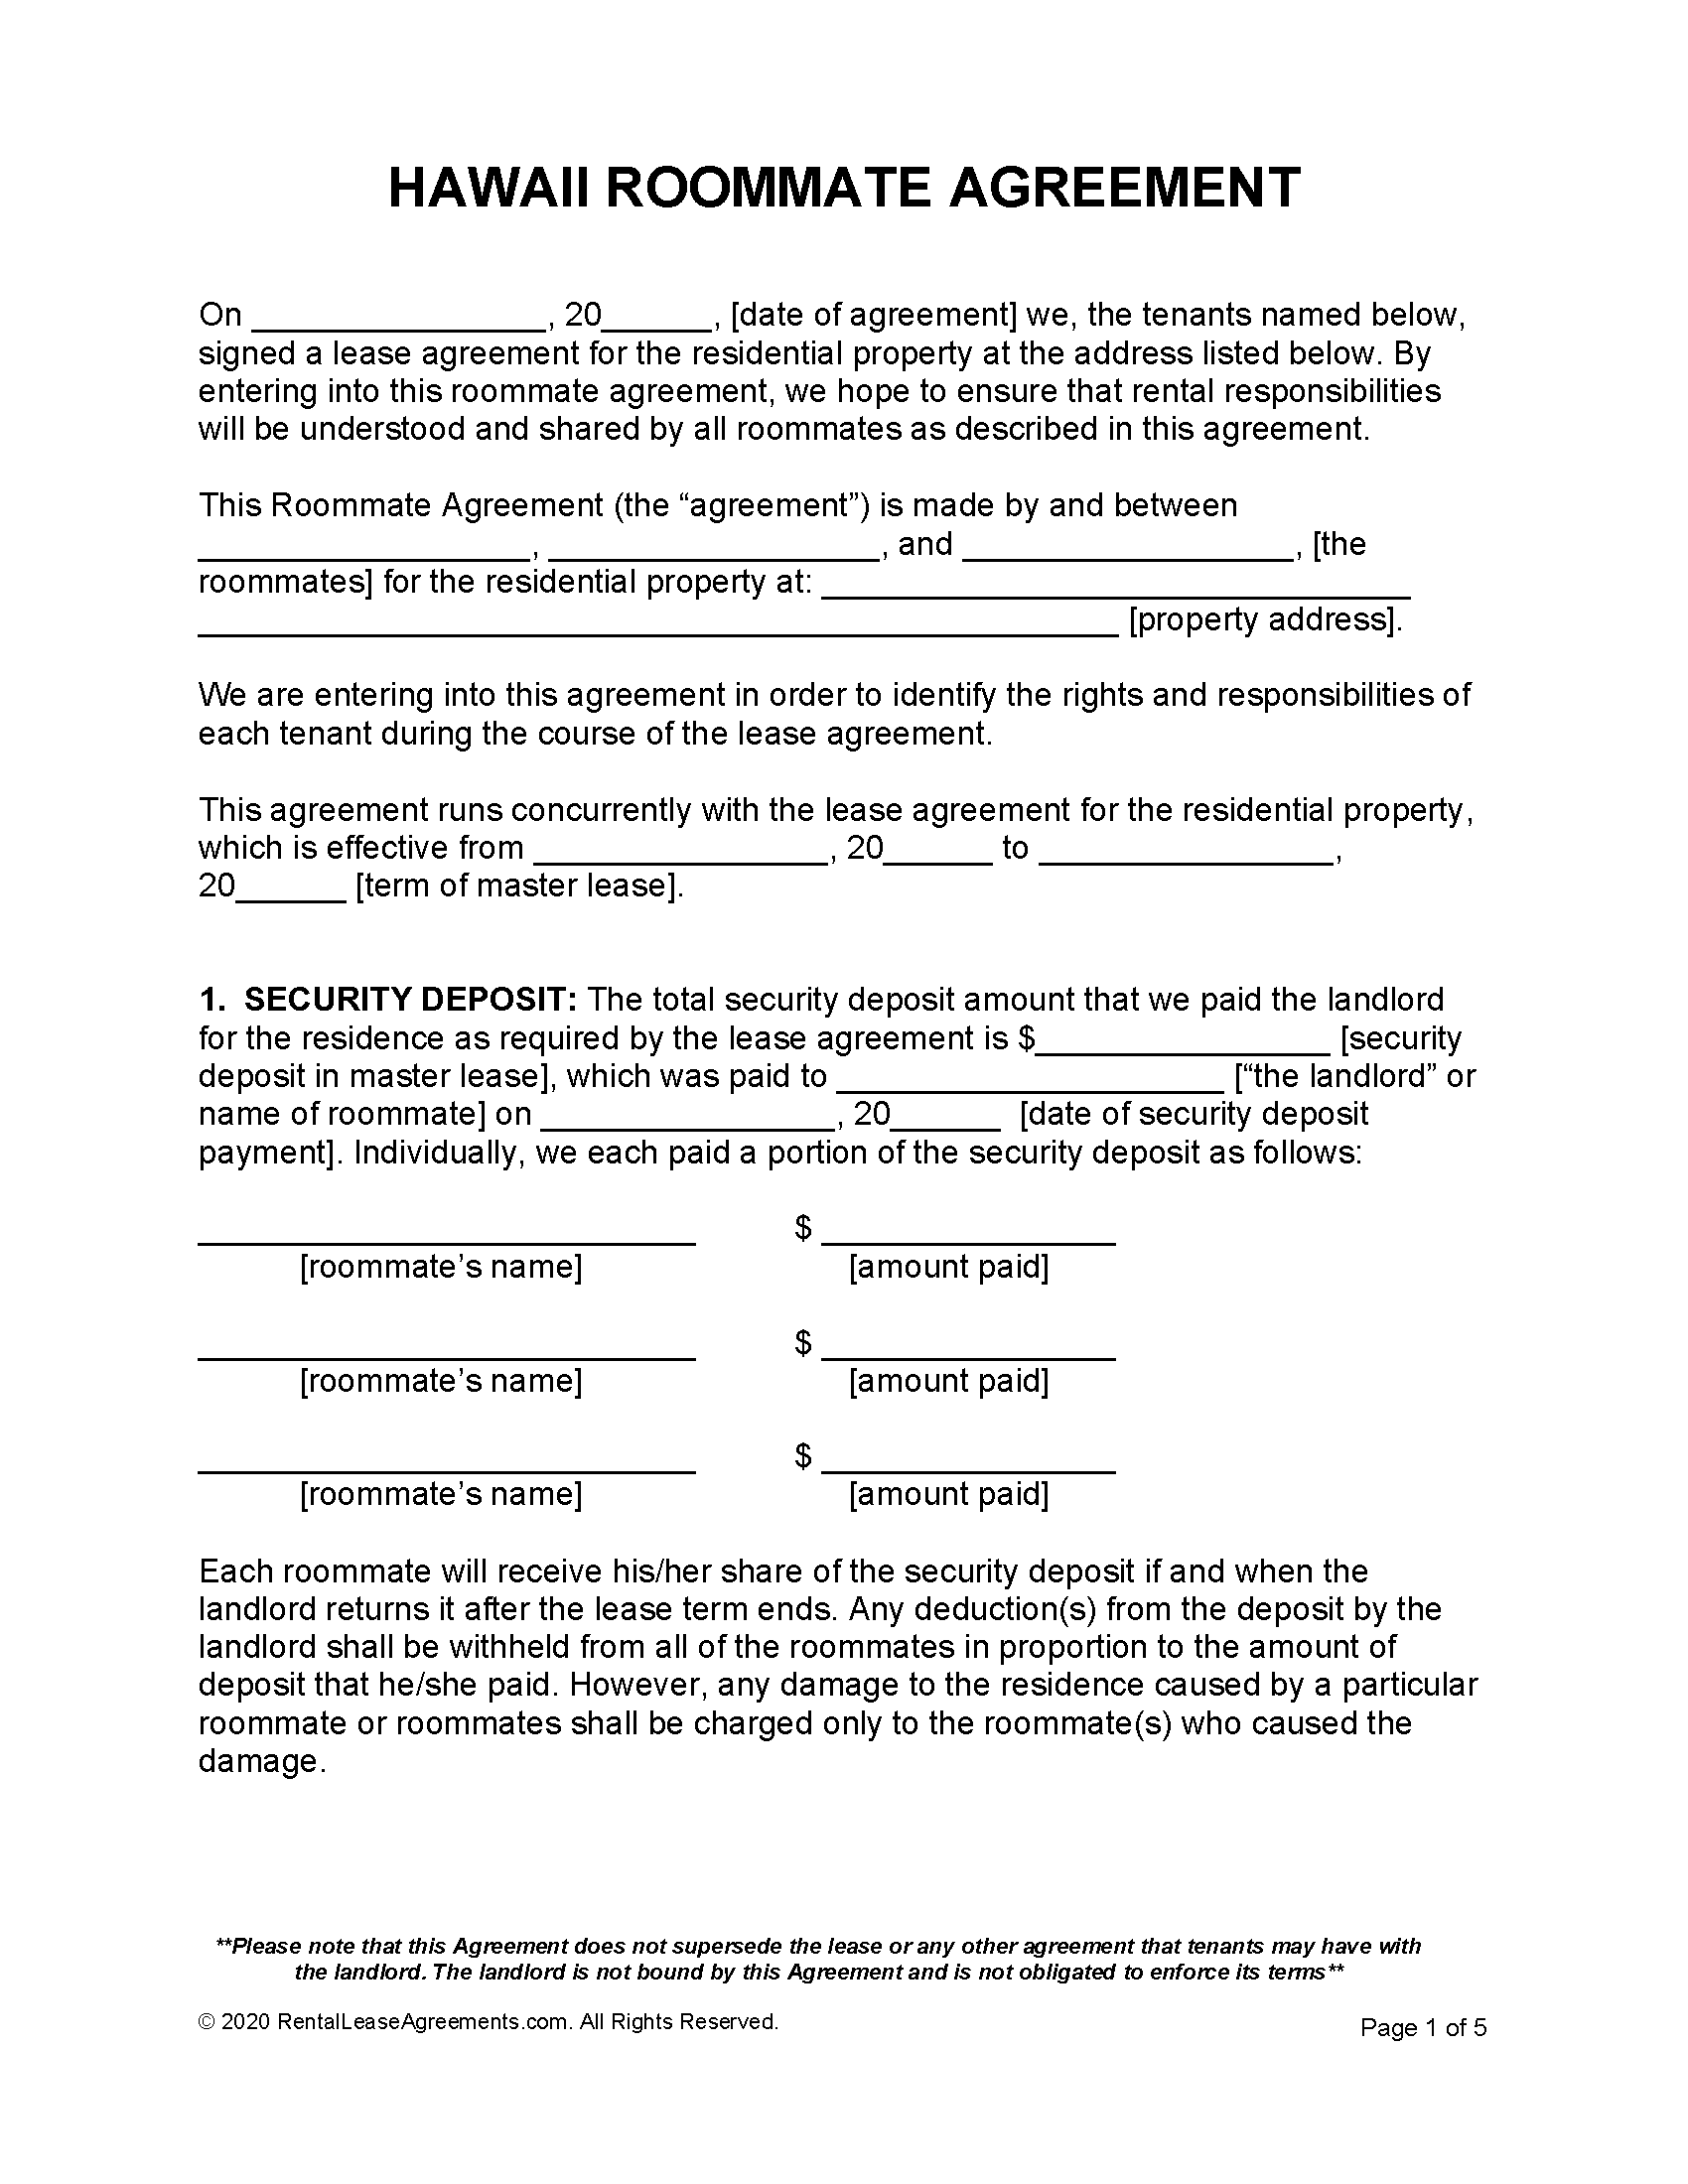 texas-association-of-realtors-residential-lease-agreement-fillable-form